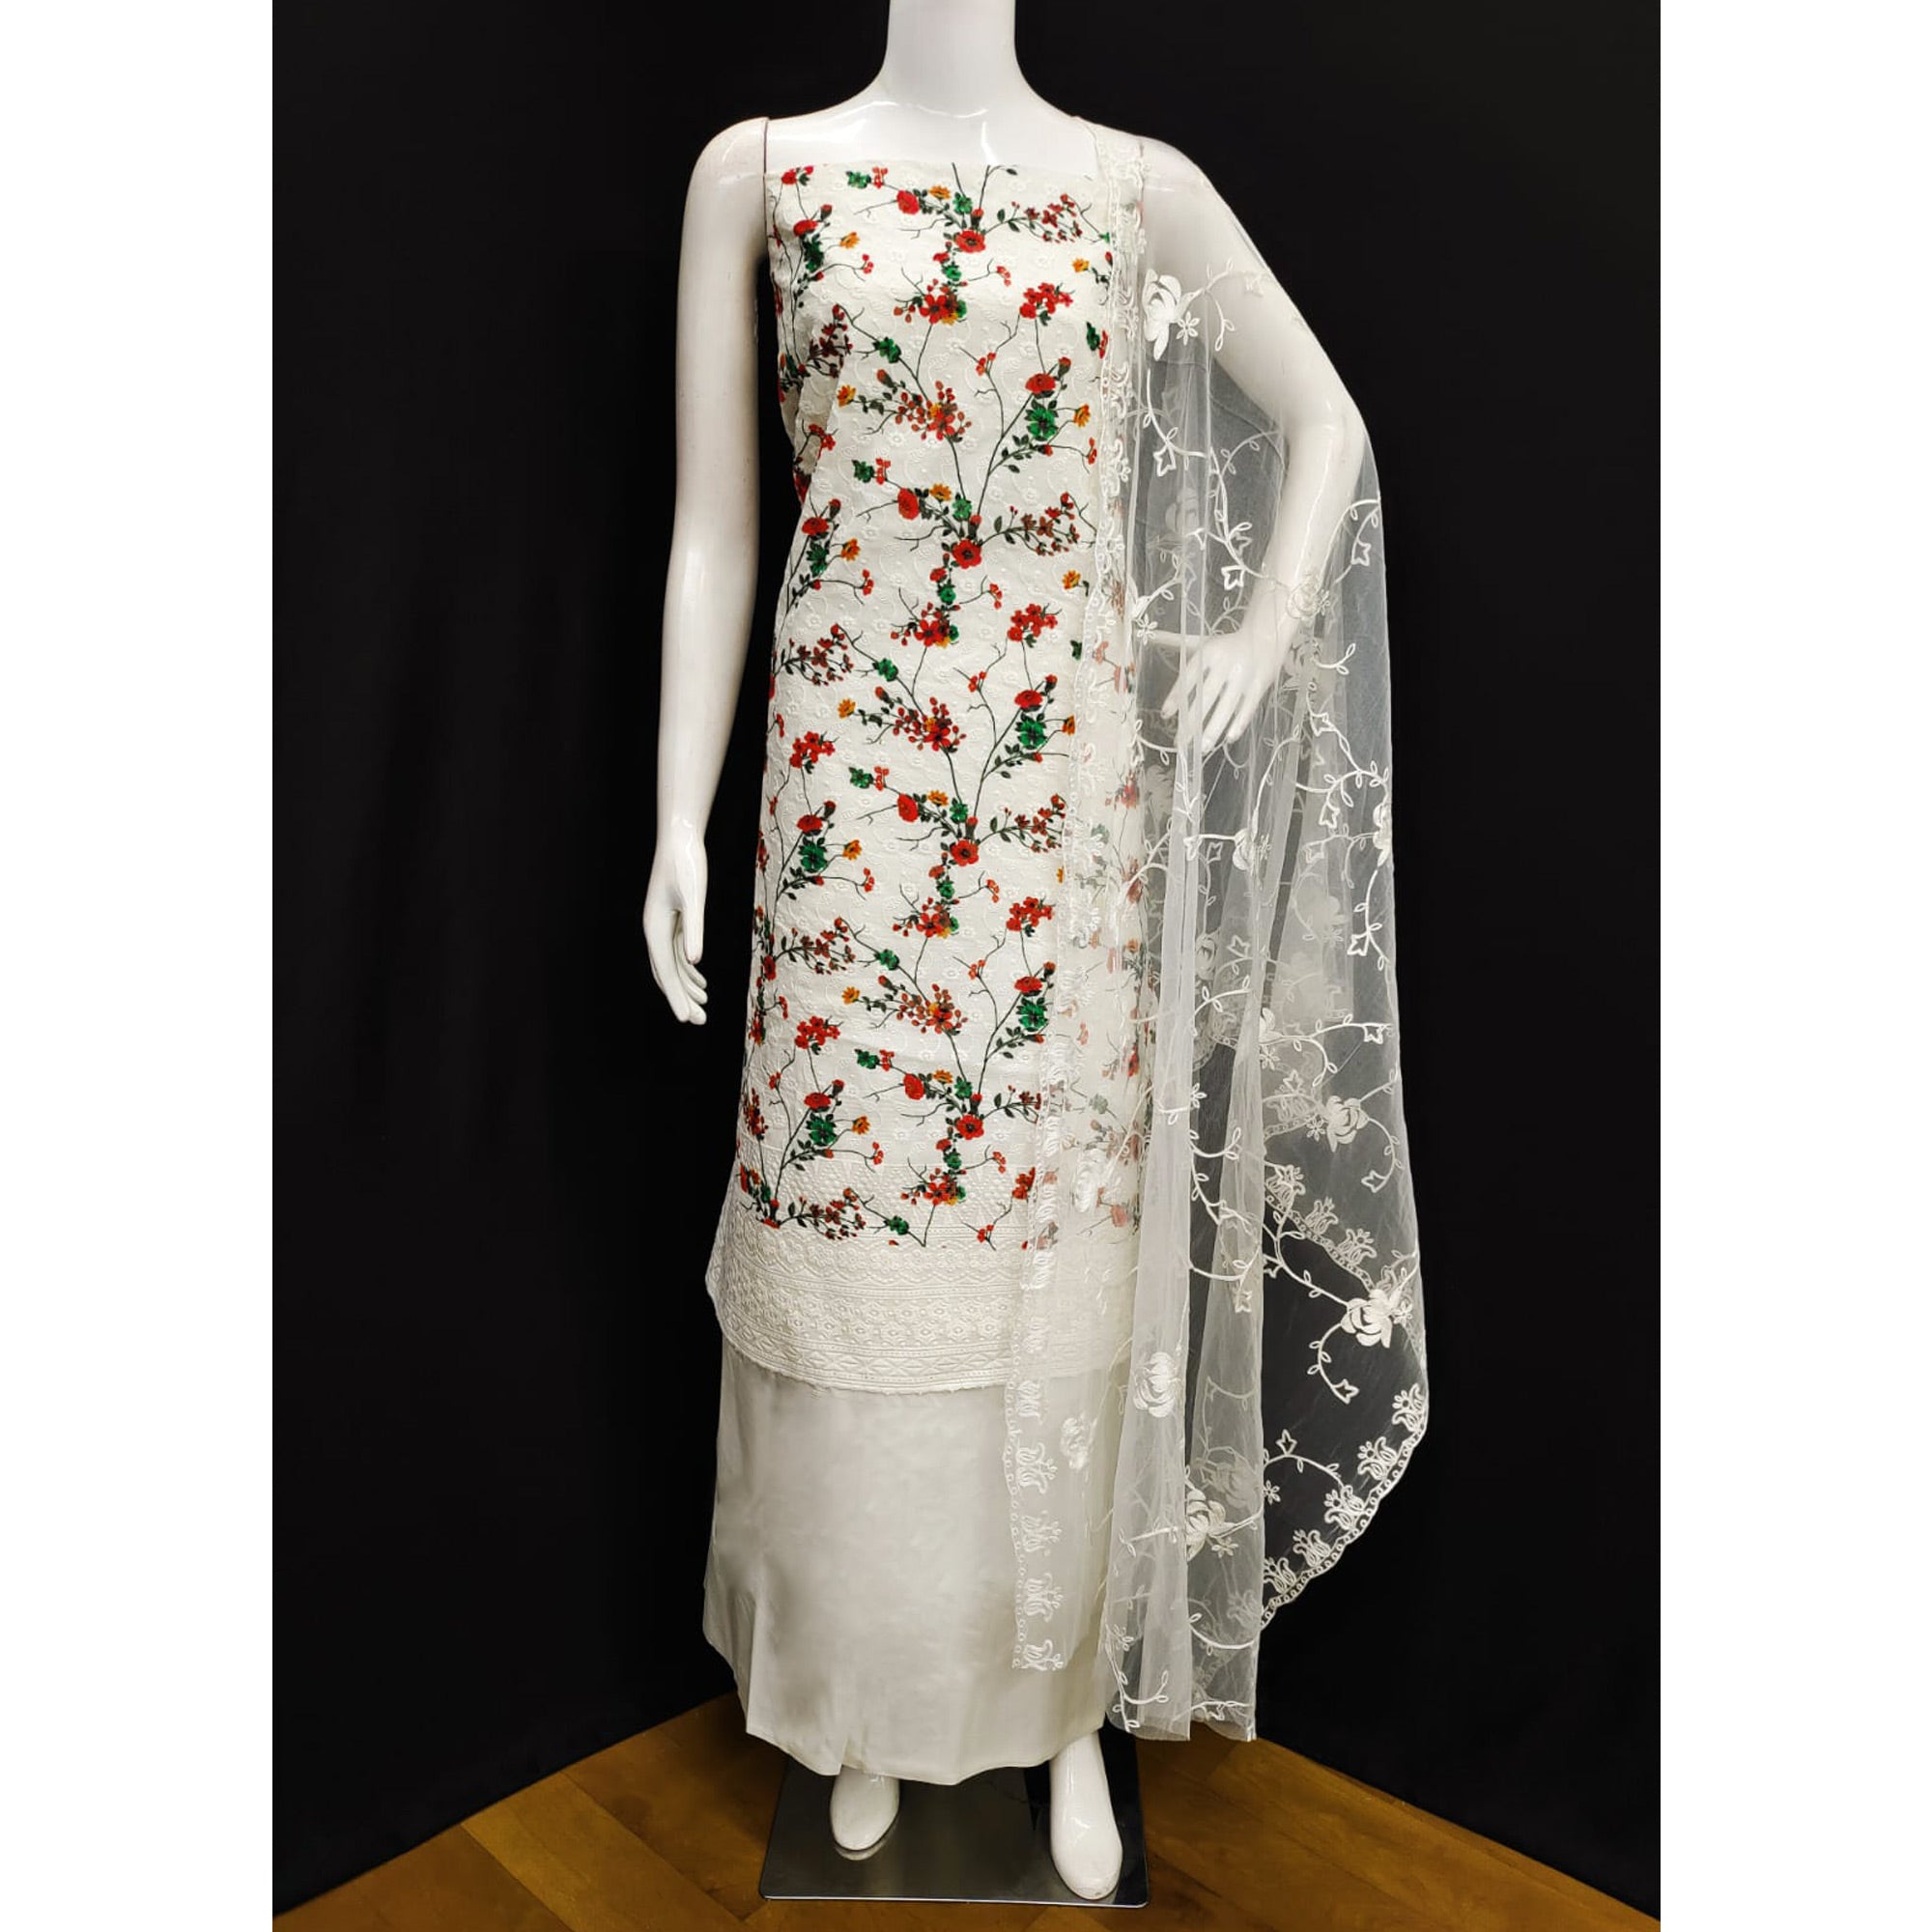 Off White Lucknowi With Embroidered Cotton Blend Dress Material